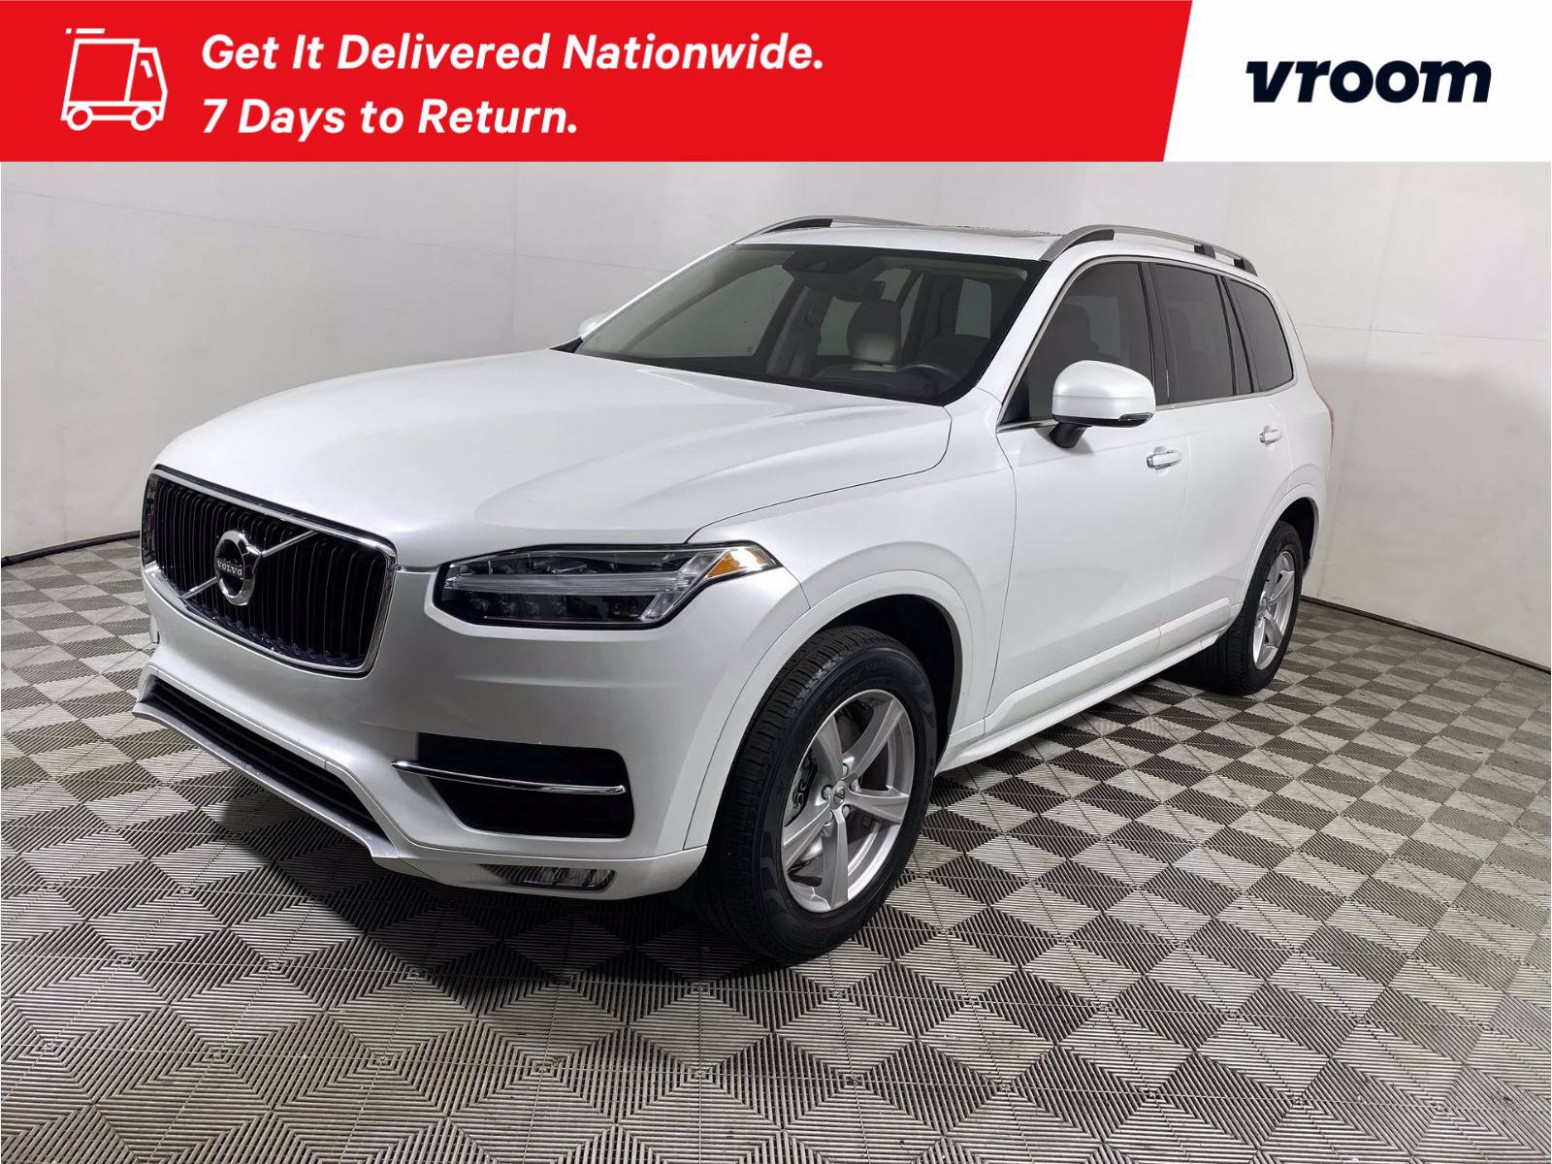 New Model and Performance used volvo xc90 inscription